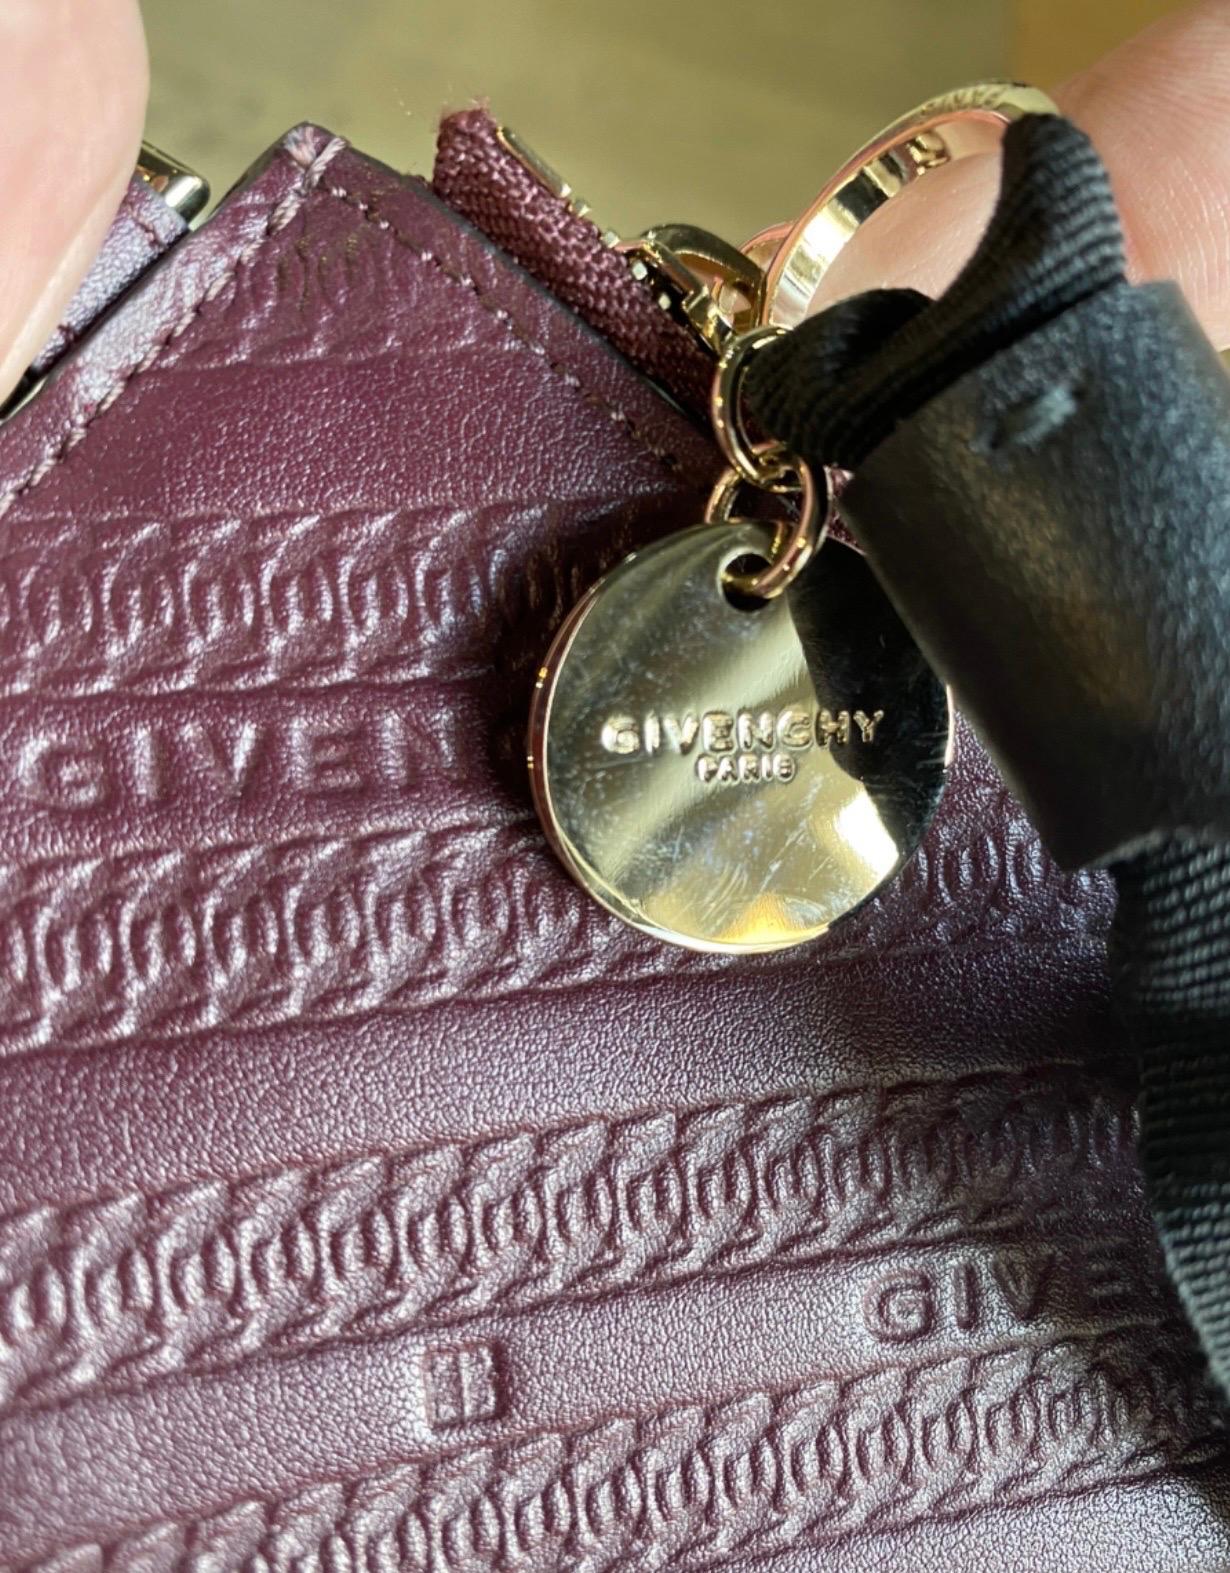 Givenchy burgundi leather Clutch Bag In Excellent Condition For Sale In Carnate, IT